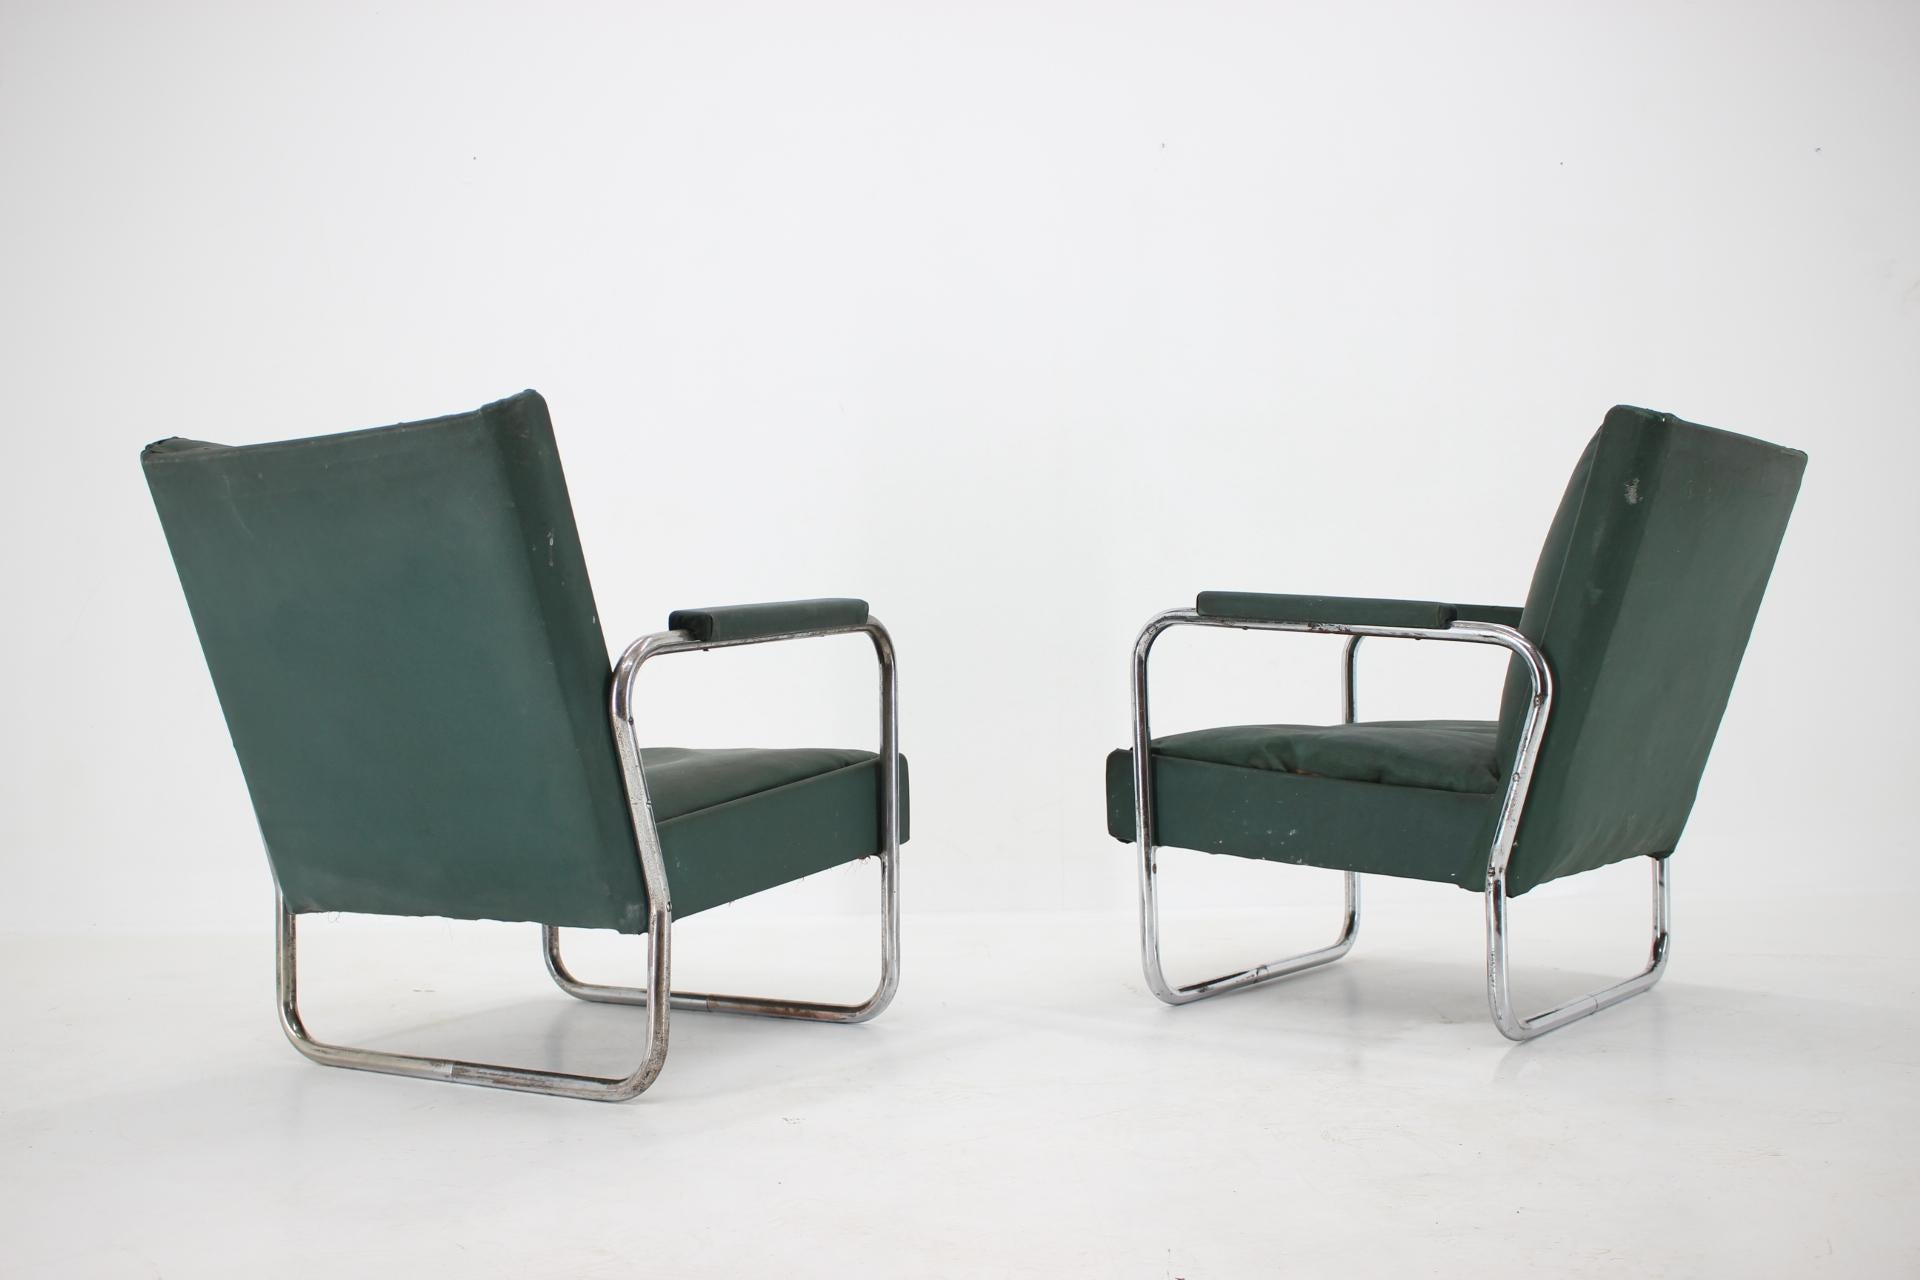 - 1930
- extremely rare 
- maker: Thonet (marked)
- design:L Walter Knoll
- publicated (see the pictures)
- original condition suitable for new upholstery
- chrome with patina.